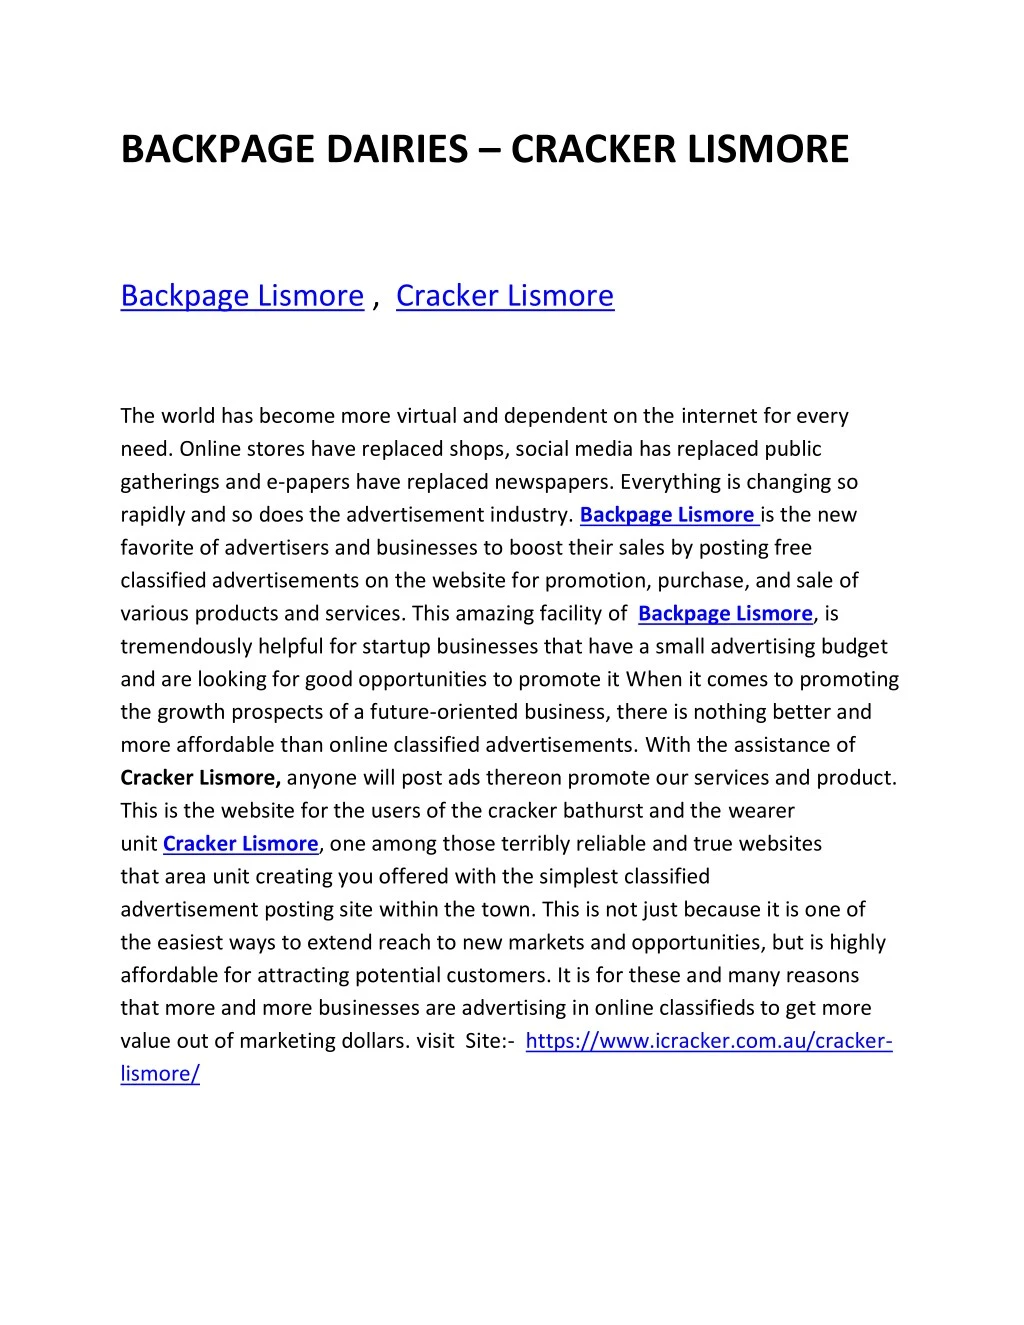 backpage dairies cracker lismore